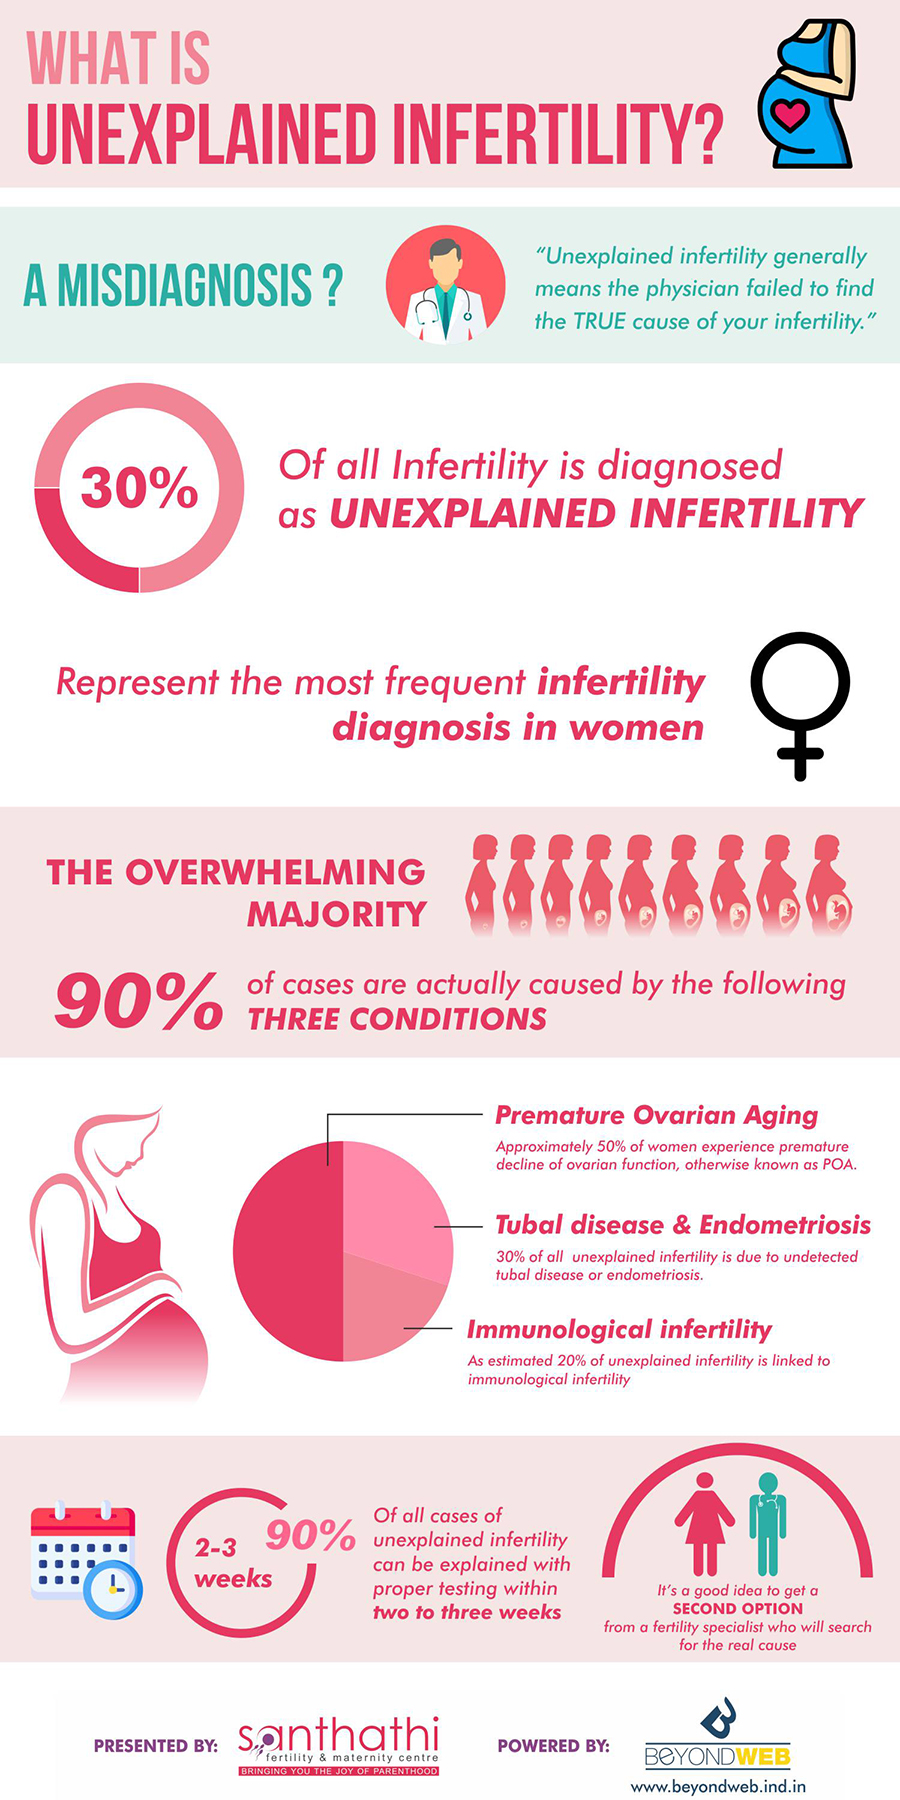 What is Unexplained Infertility